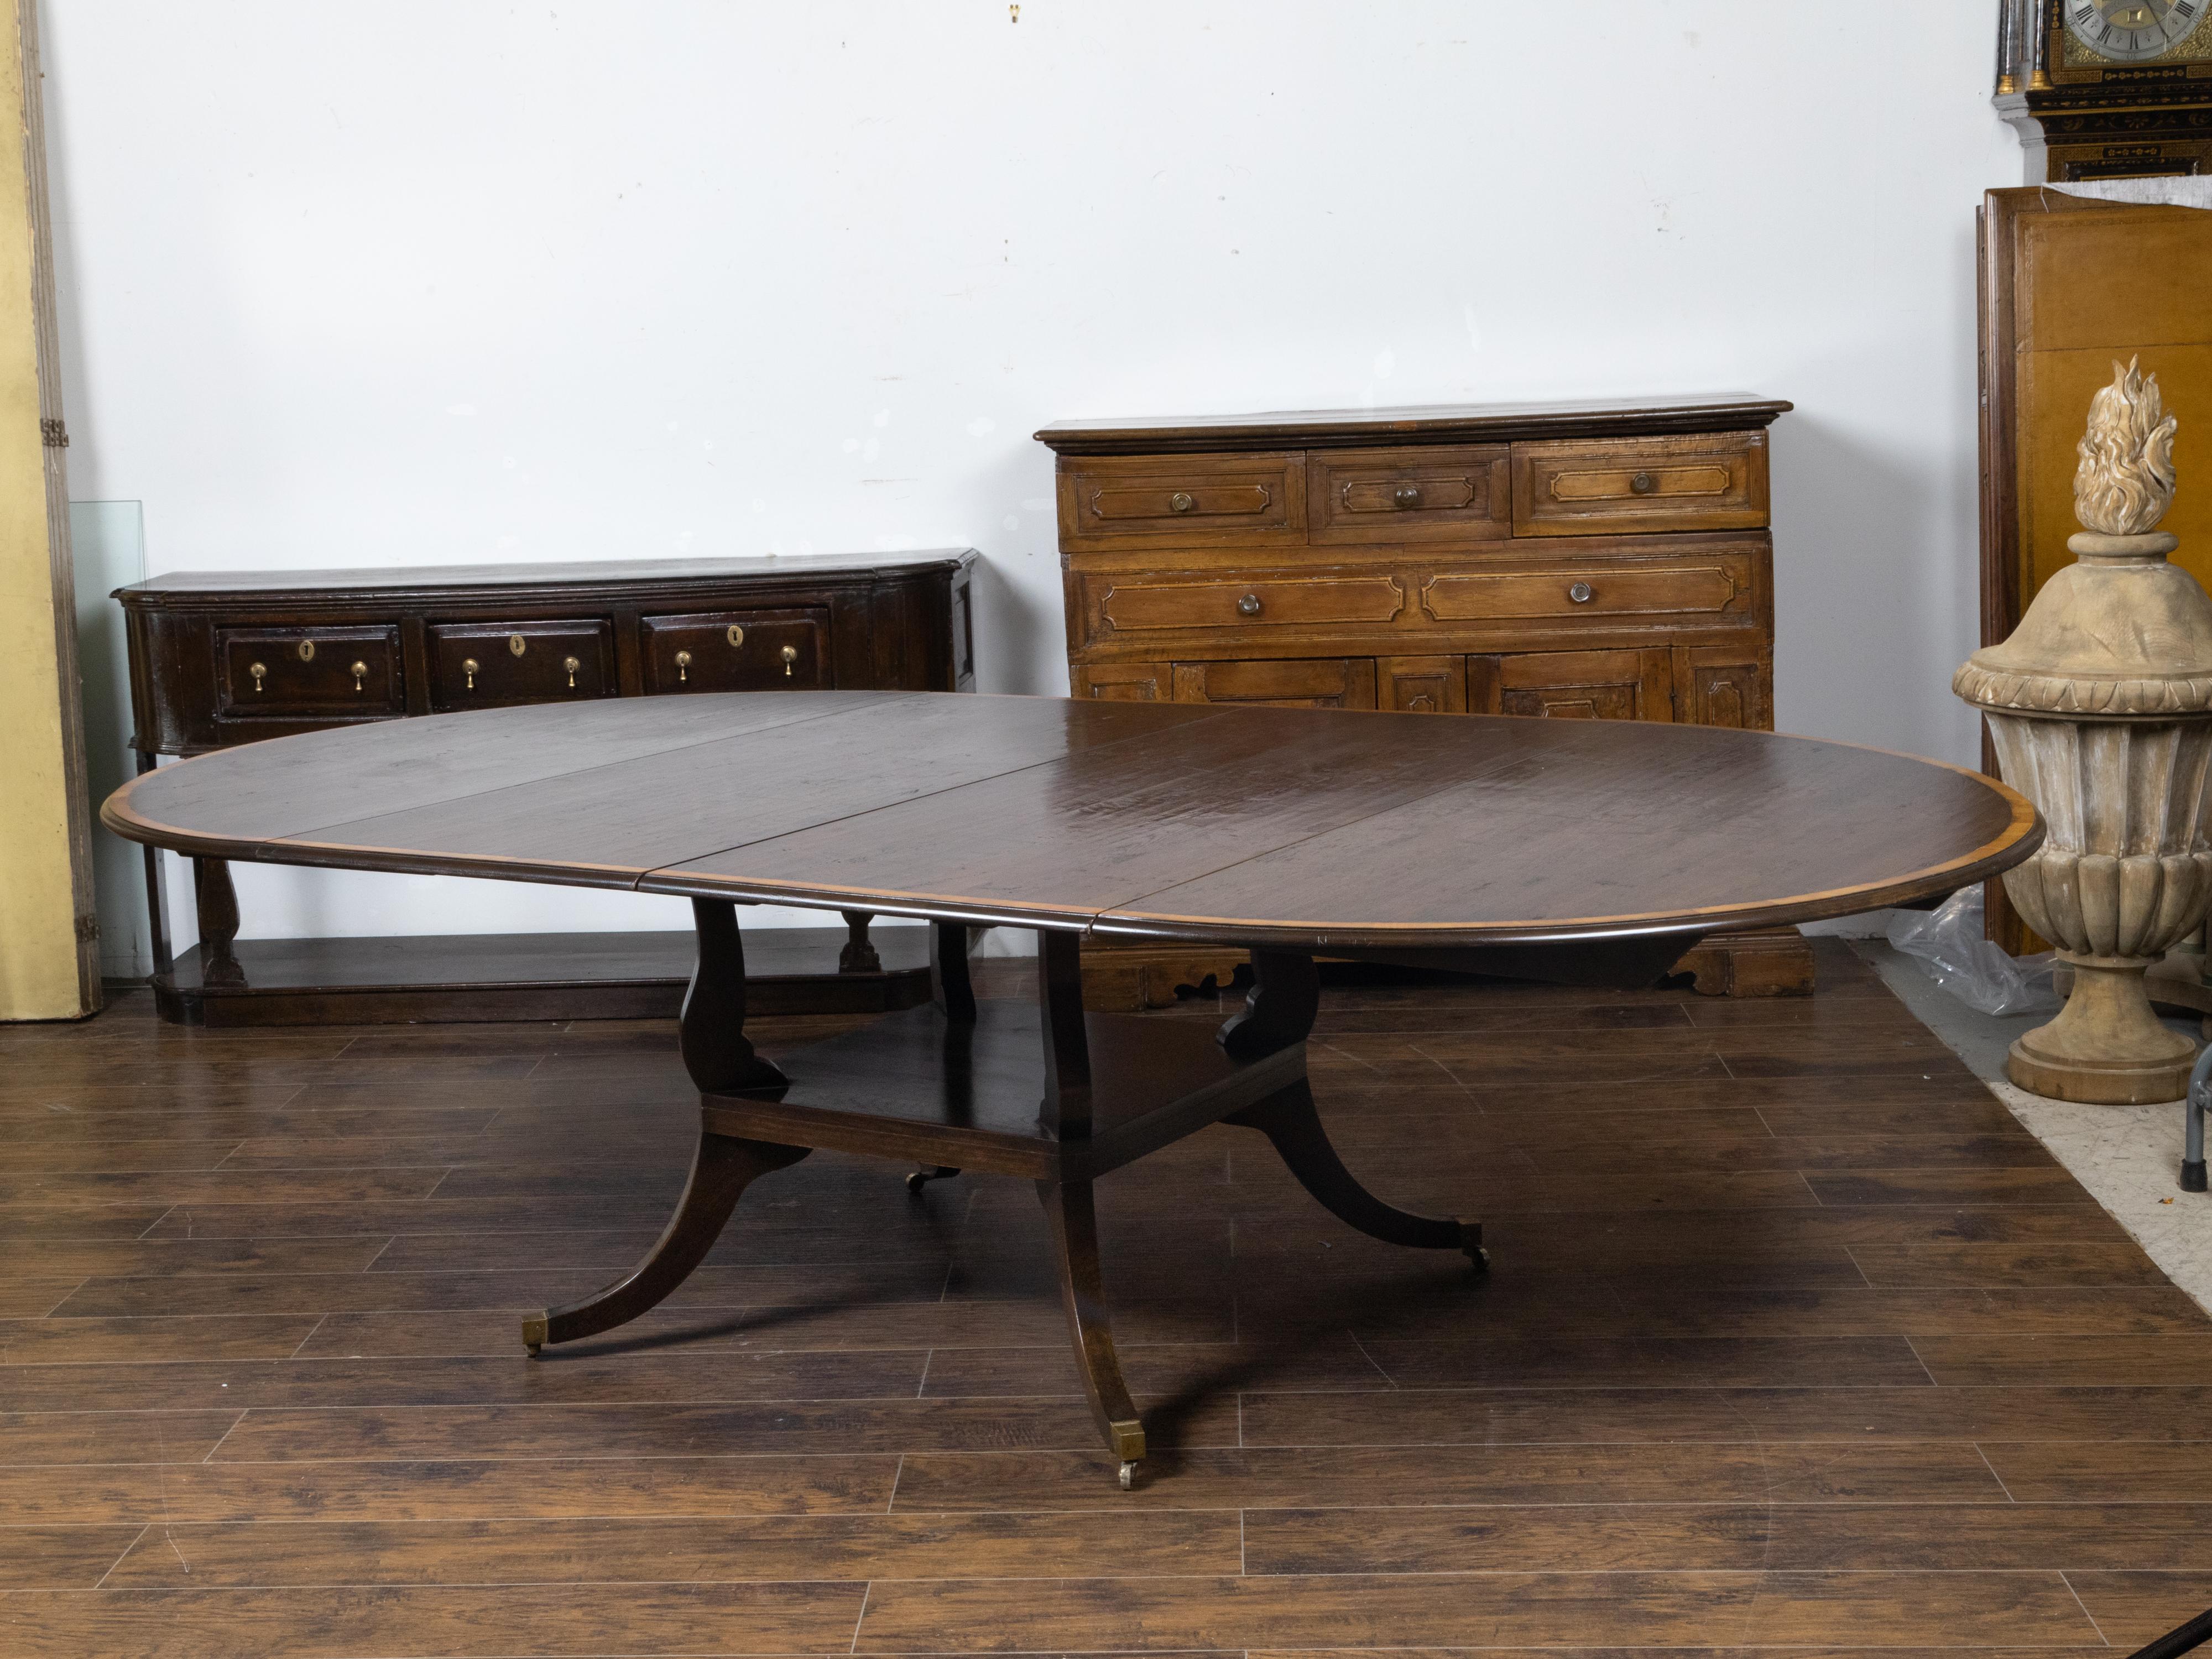 Vintage English Oak Extension Table with Two Leaves and Four Legs on Casters For Sale 5